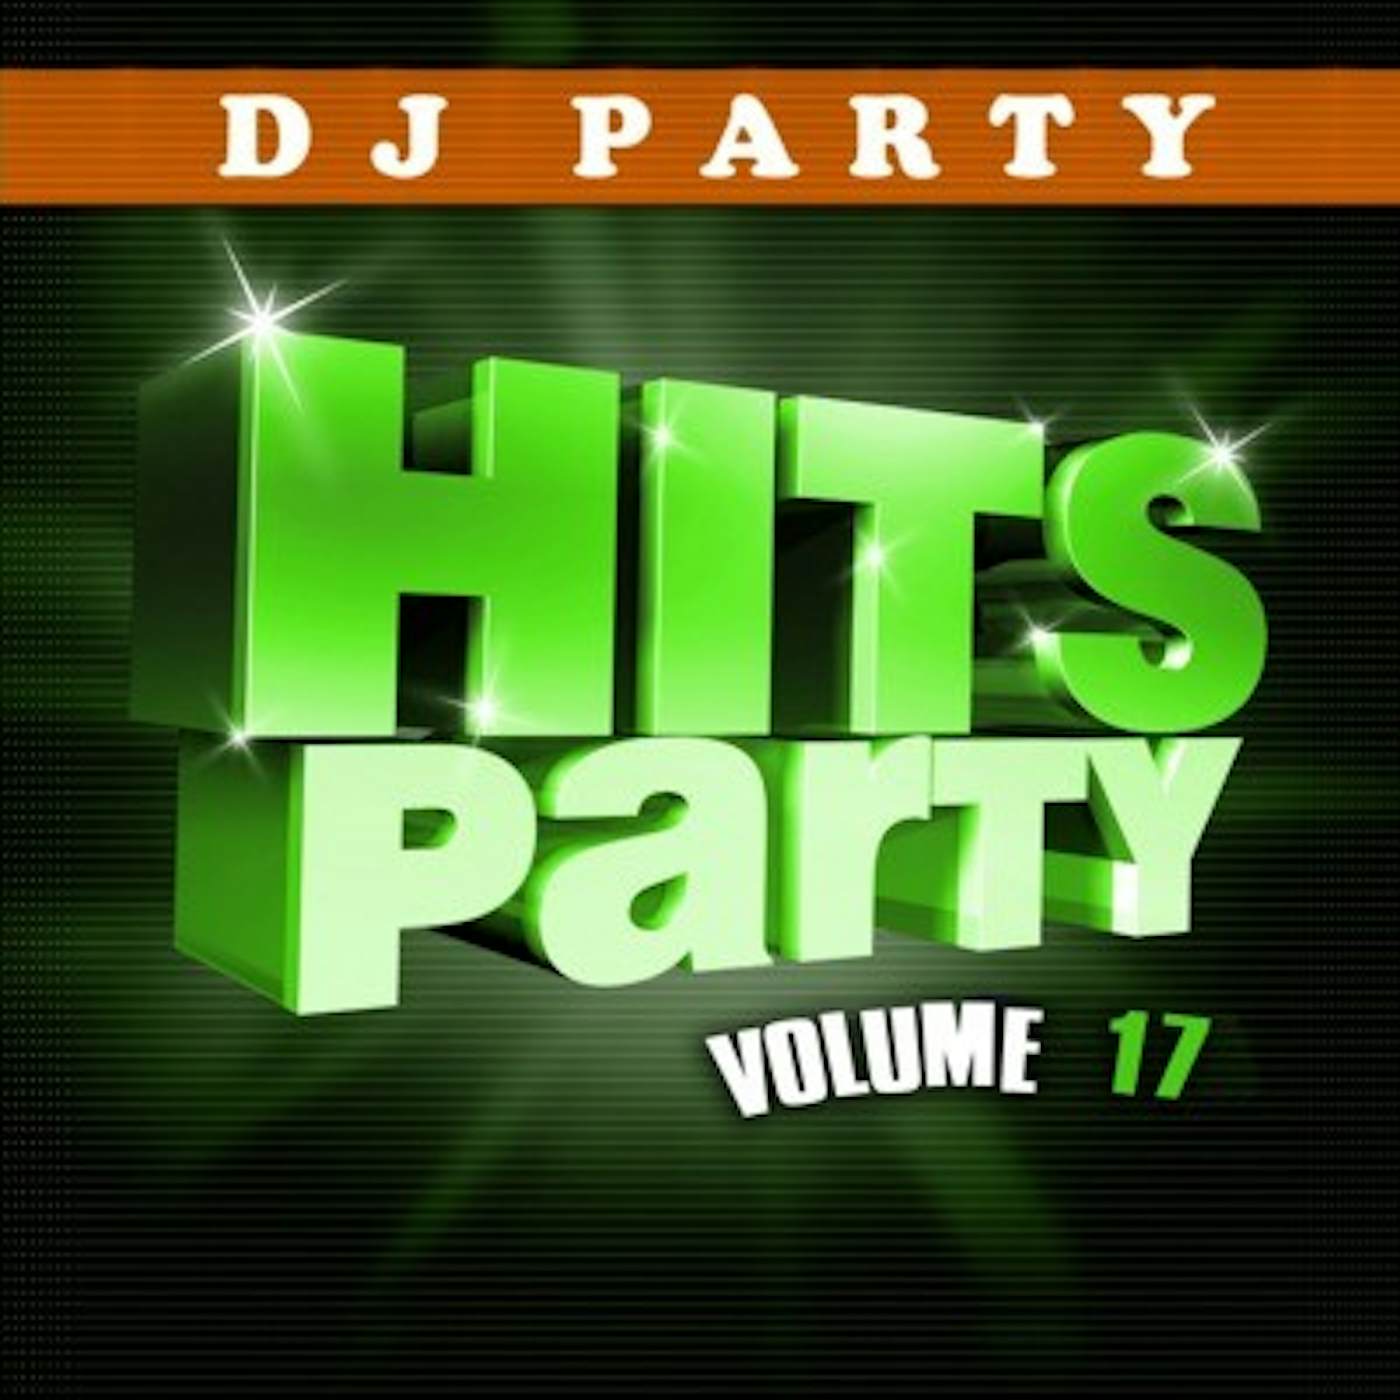 DJ Party HITS PARTY 17 CD